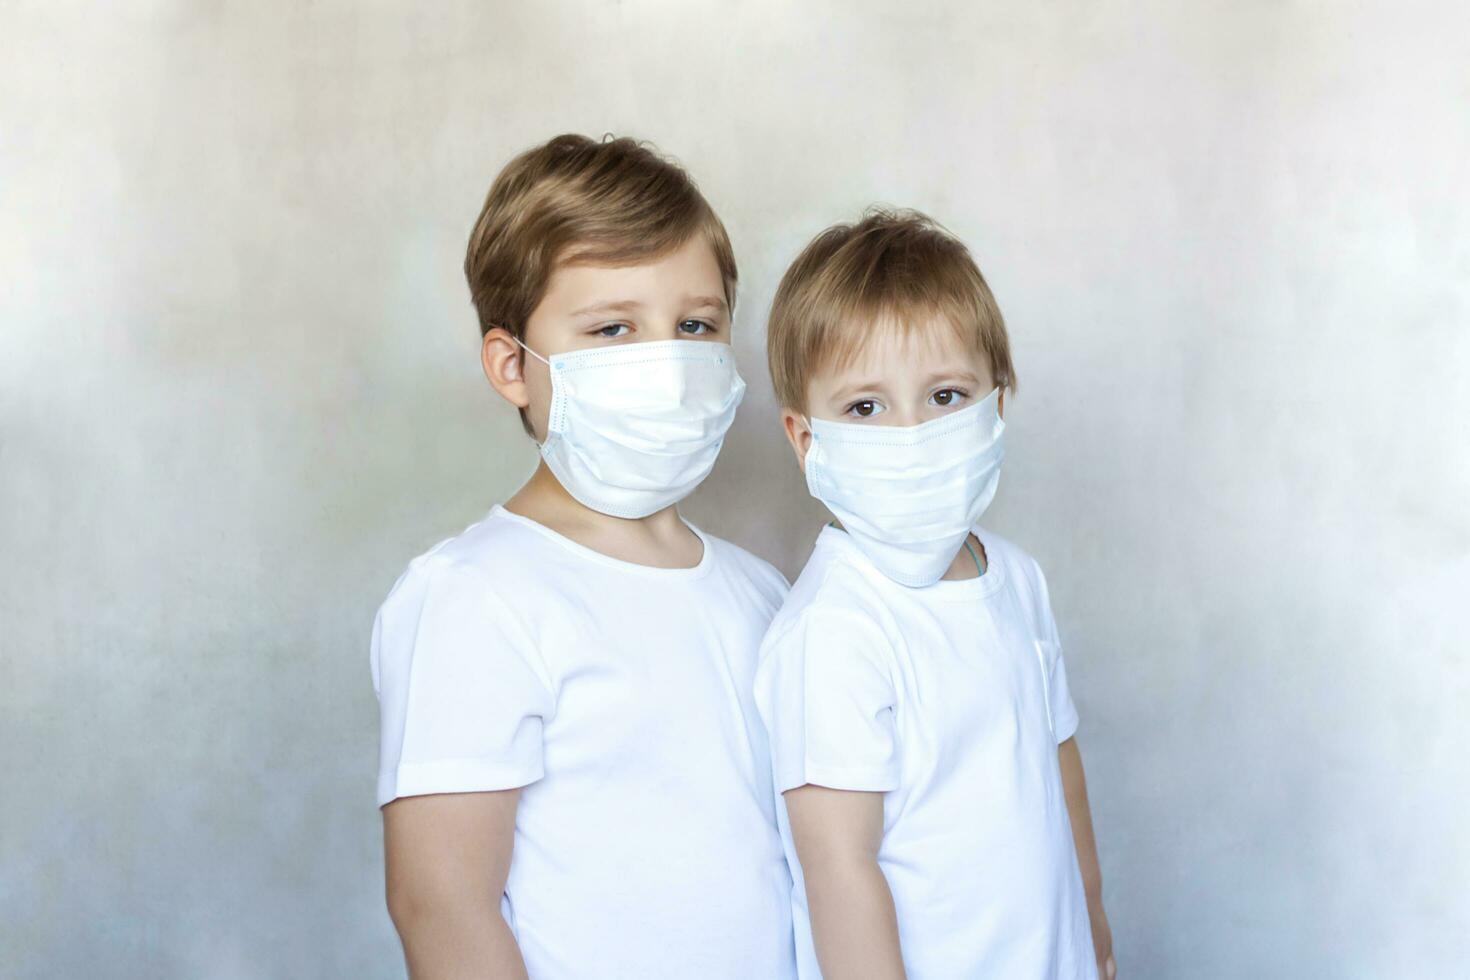 Boys-brothers in medical masks. Coronavirus, disease, infection, quarantine, medical mask, COVID-19. Quarantine and protection from influenza viruses and epidemics covid-19. photo